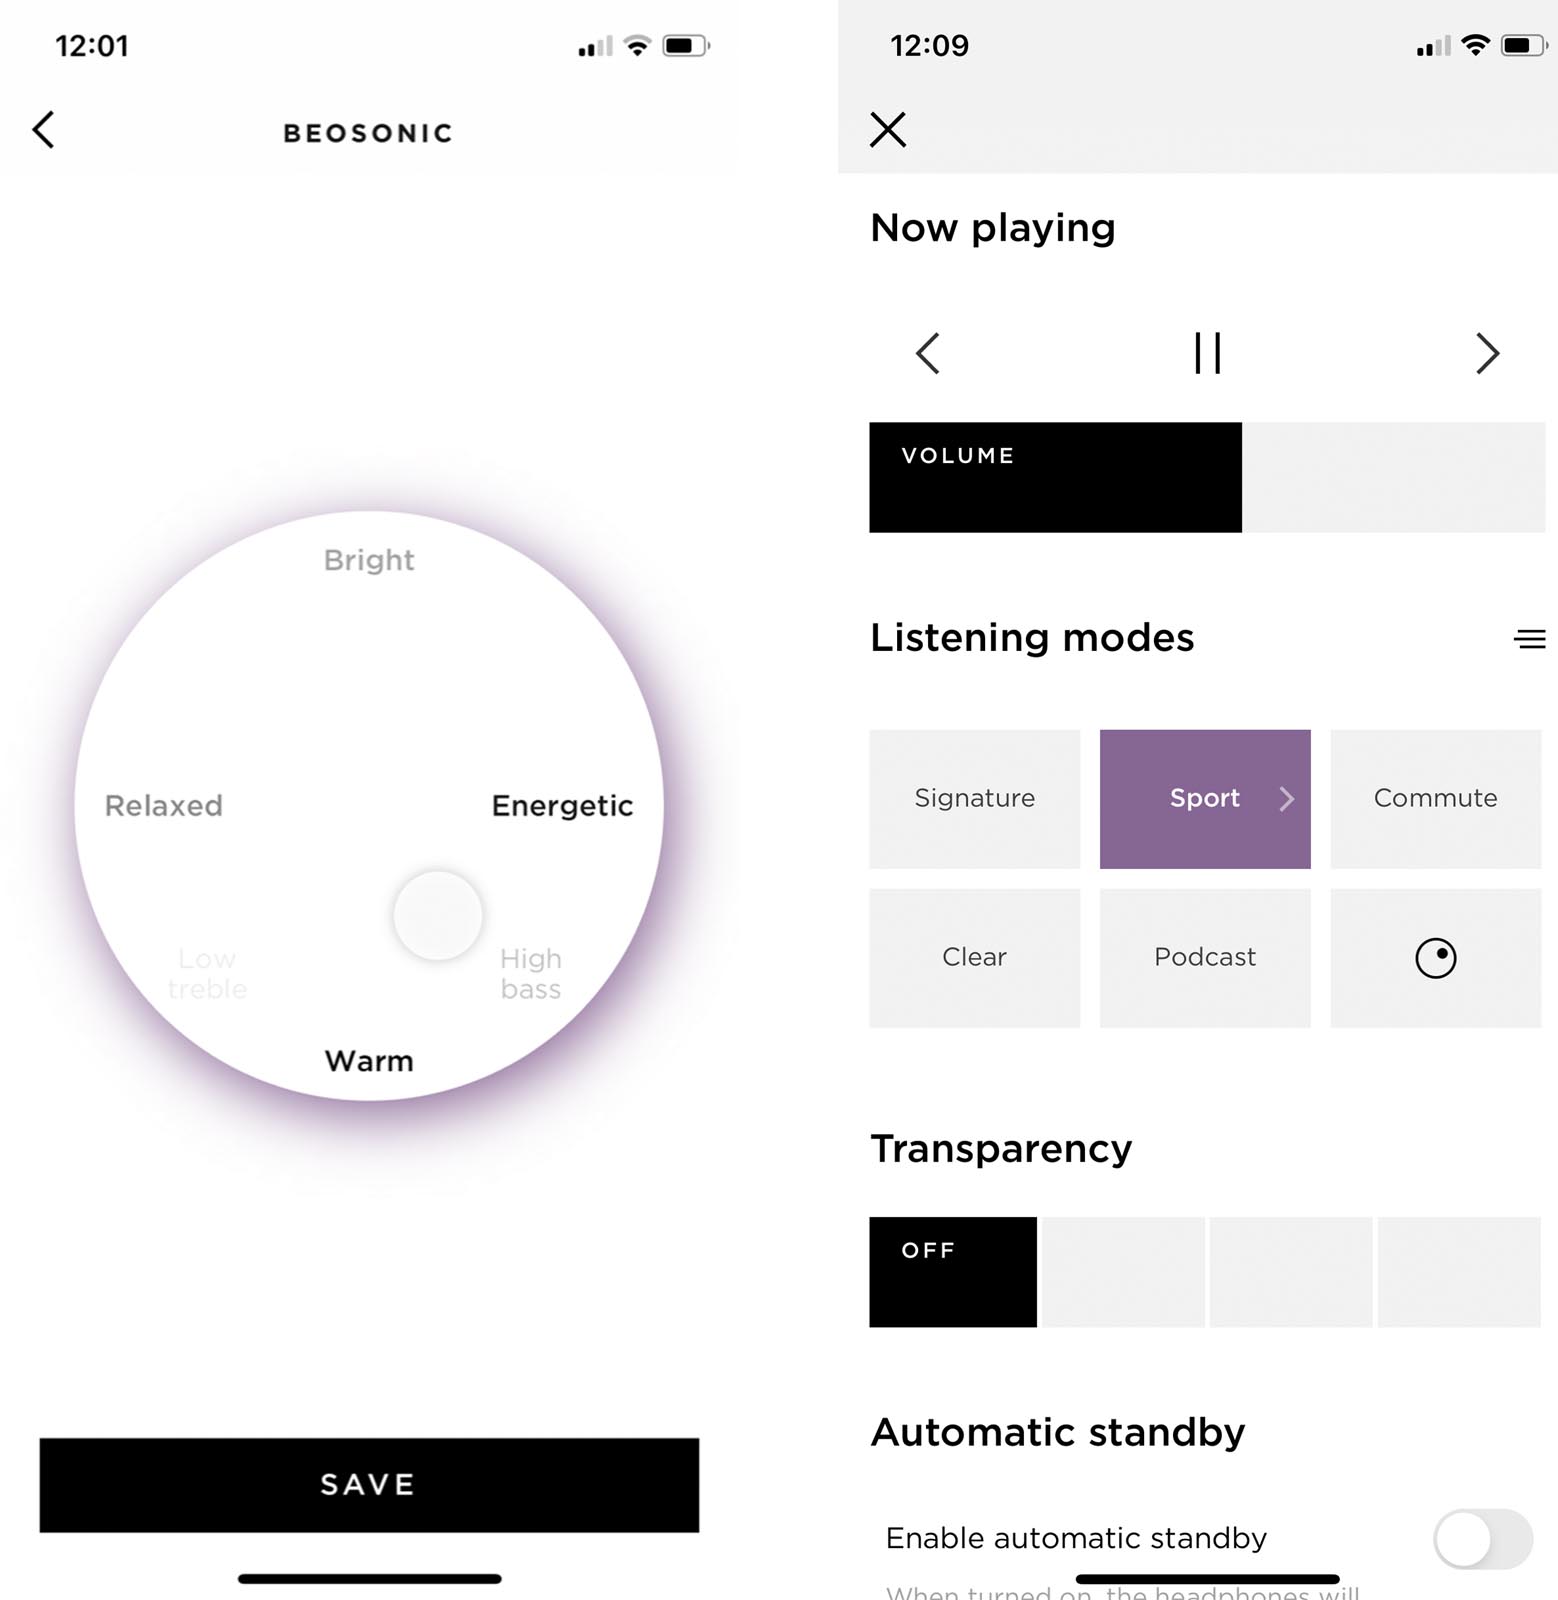 Rapha + Bang & Olufsen Limited Edition Beoplay E8 Sport earphones app